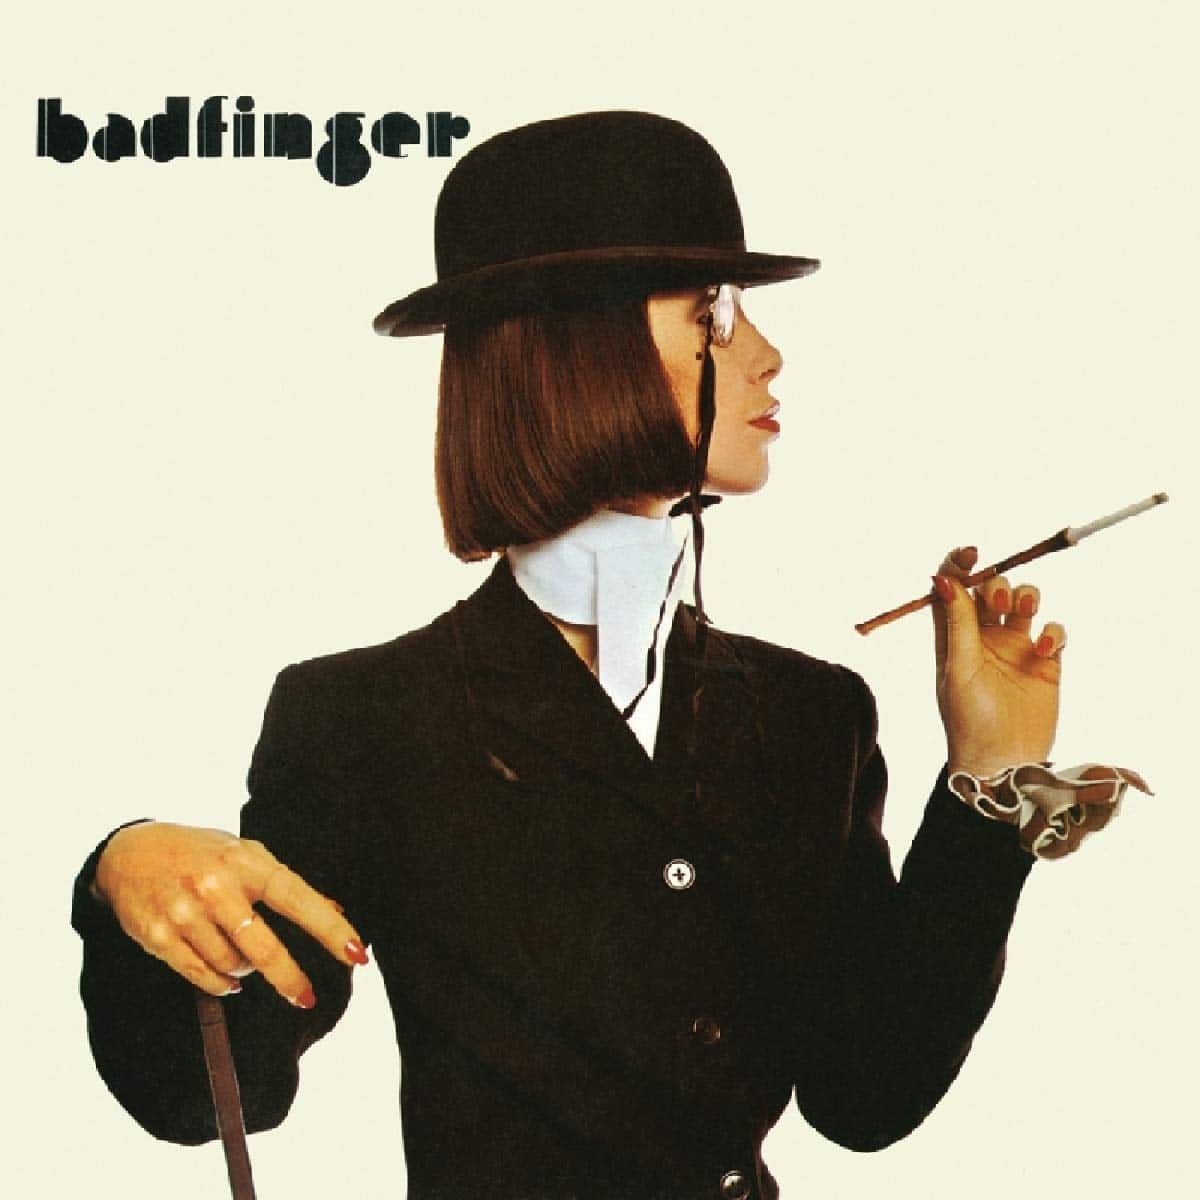 Badfinger: Badfinger/Wish You Were Here (Expanded Editions)